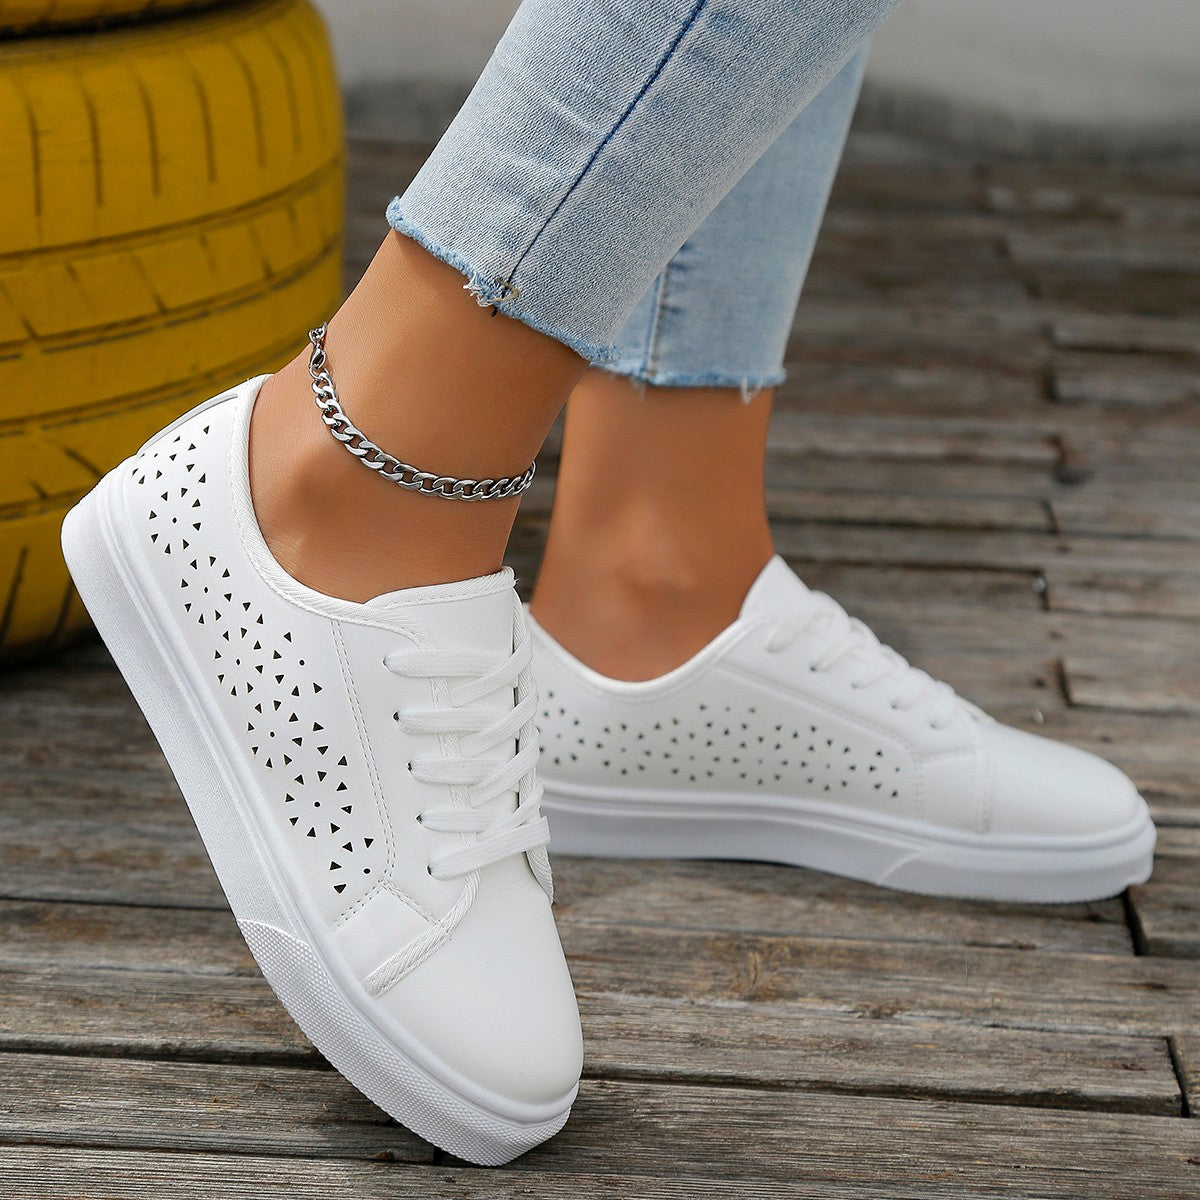 sneakers  | Cutout Flat Shoes Lace-up Hollow Out Walking Shoes For Women Loafers | White |  36.| thecurvestory.myshopify.com